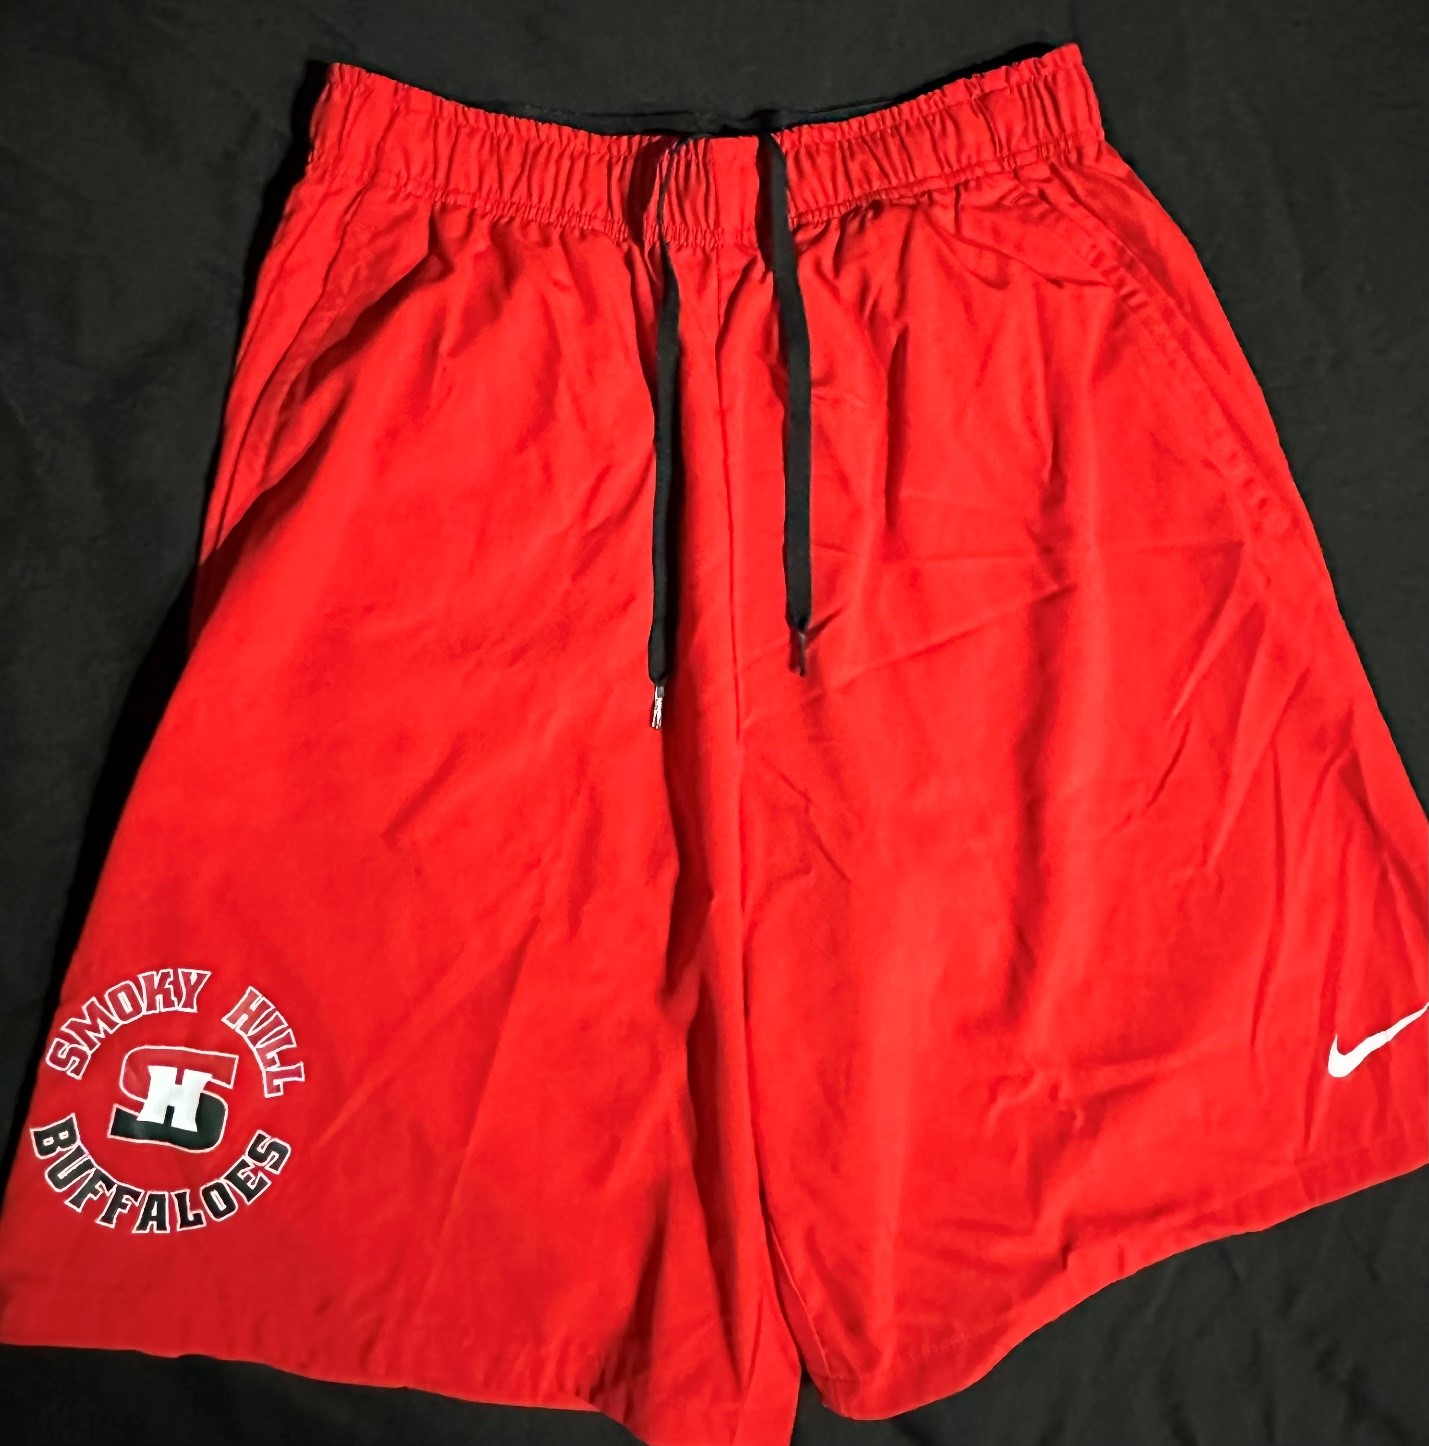 SH Red Dri-Fit Workout Shorts